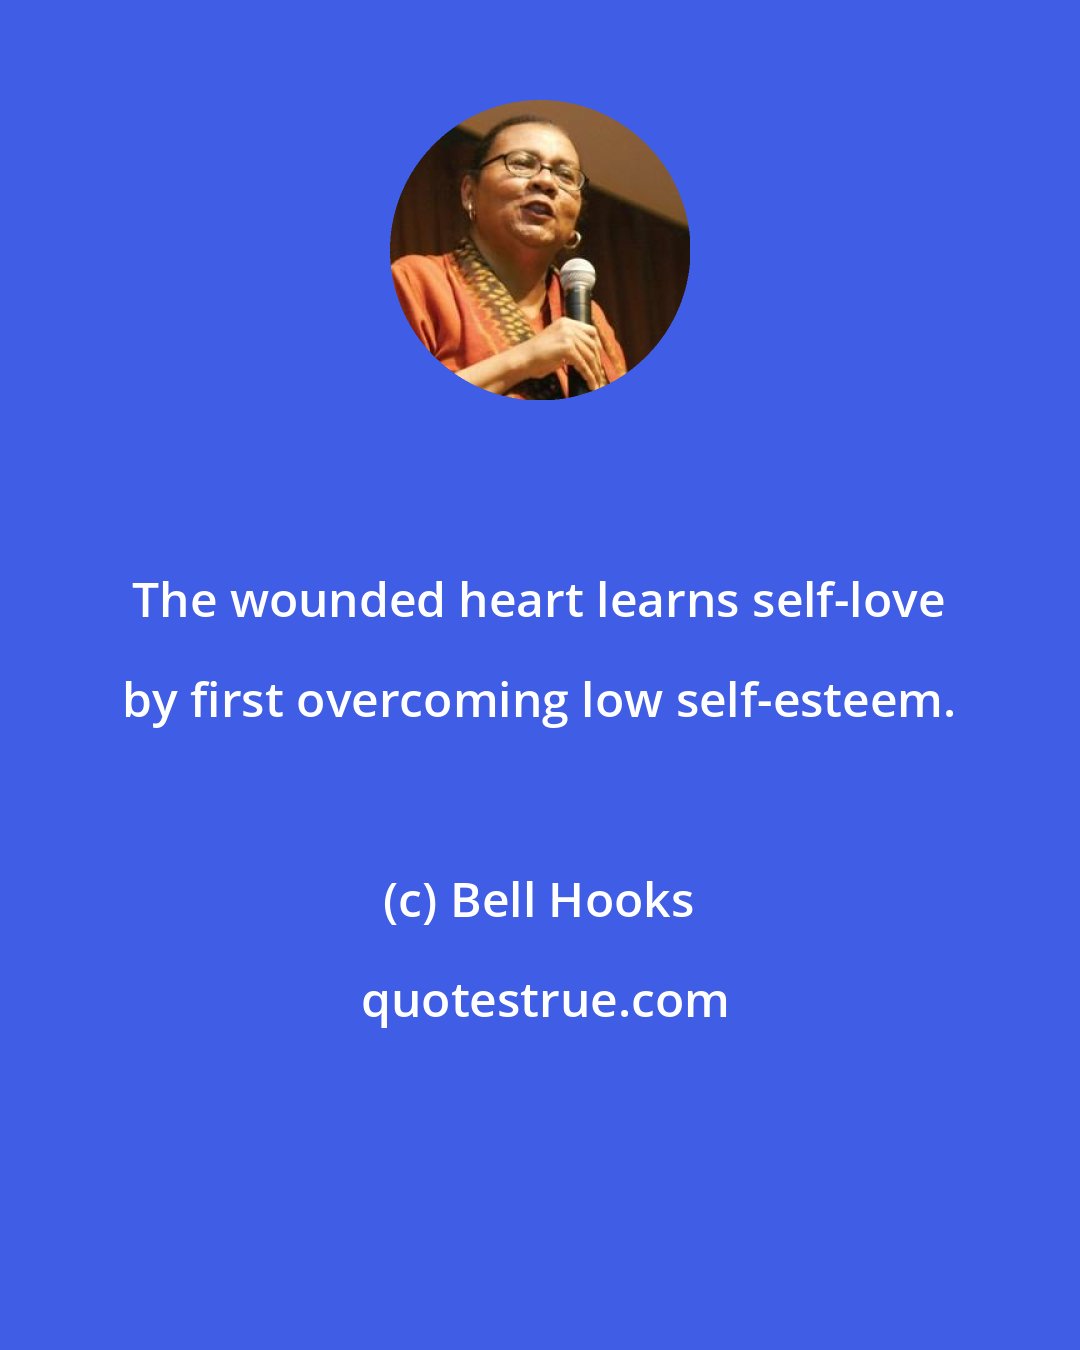 Bell Hooks: The wounded heart learns self-love by first overcoming low self-esteem.